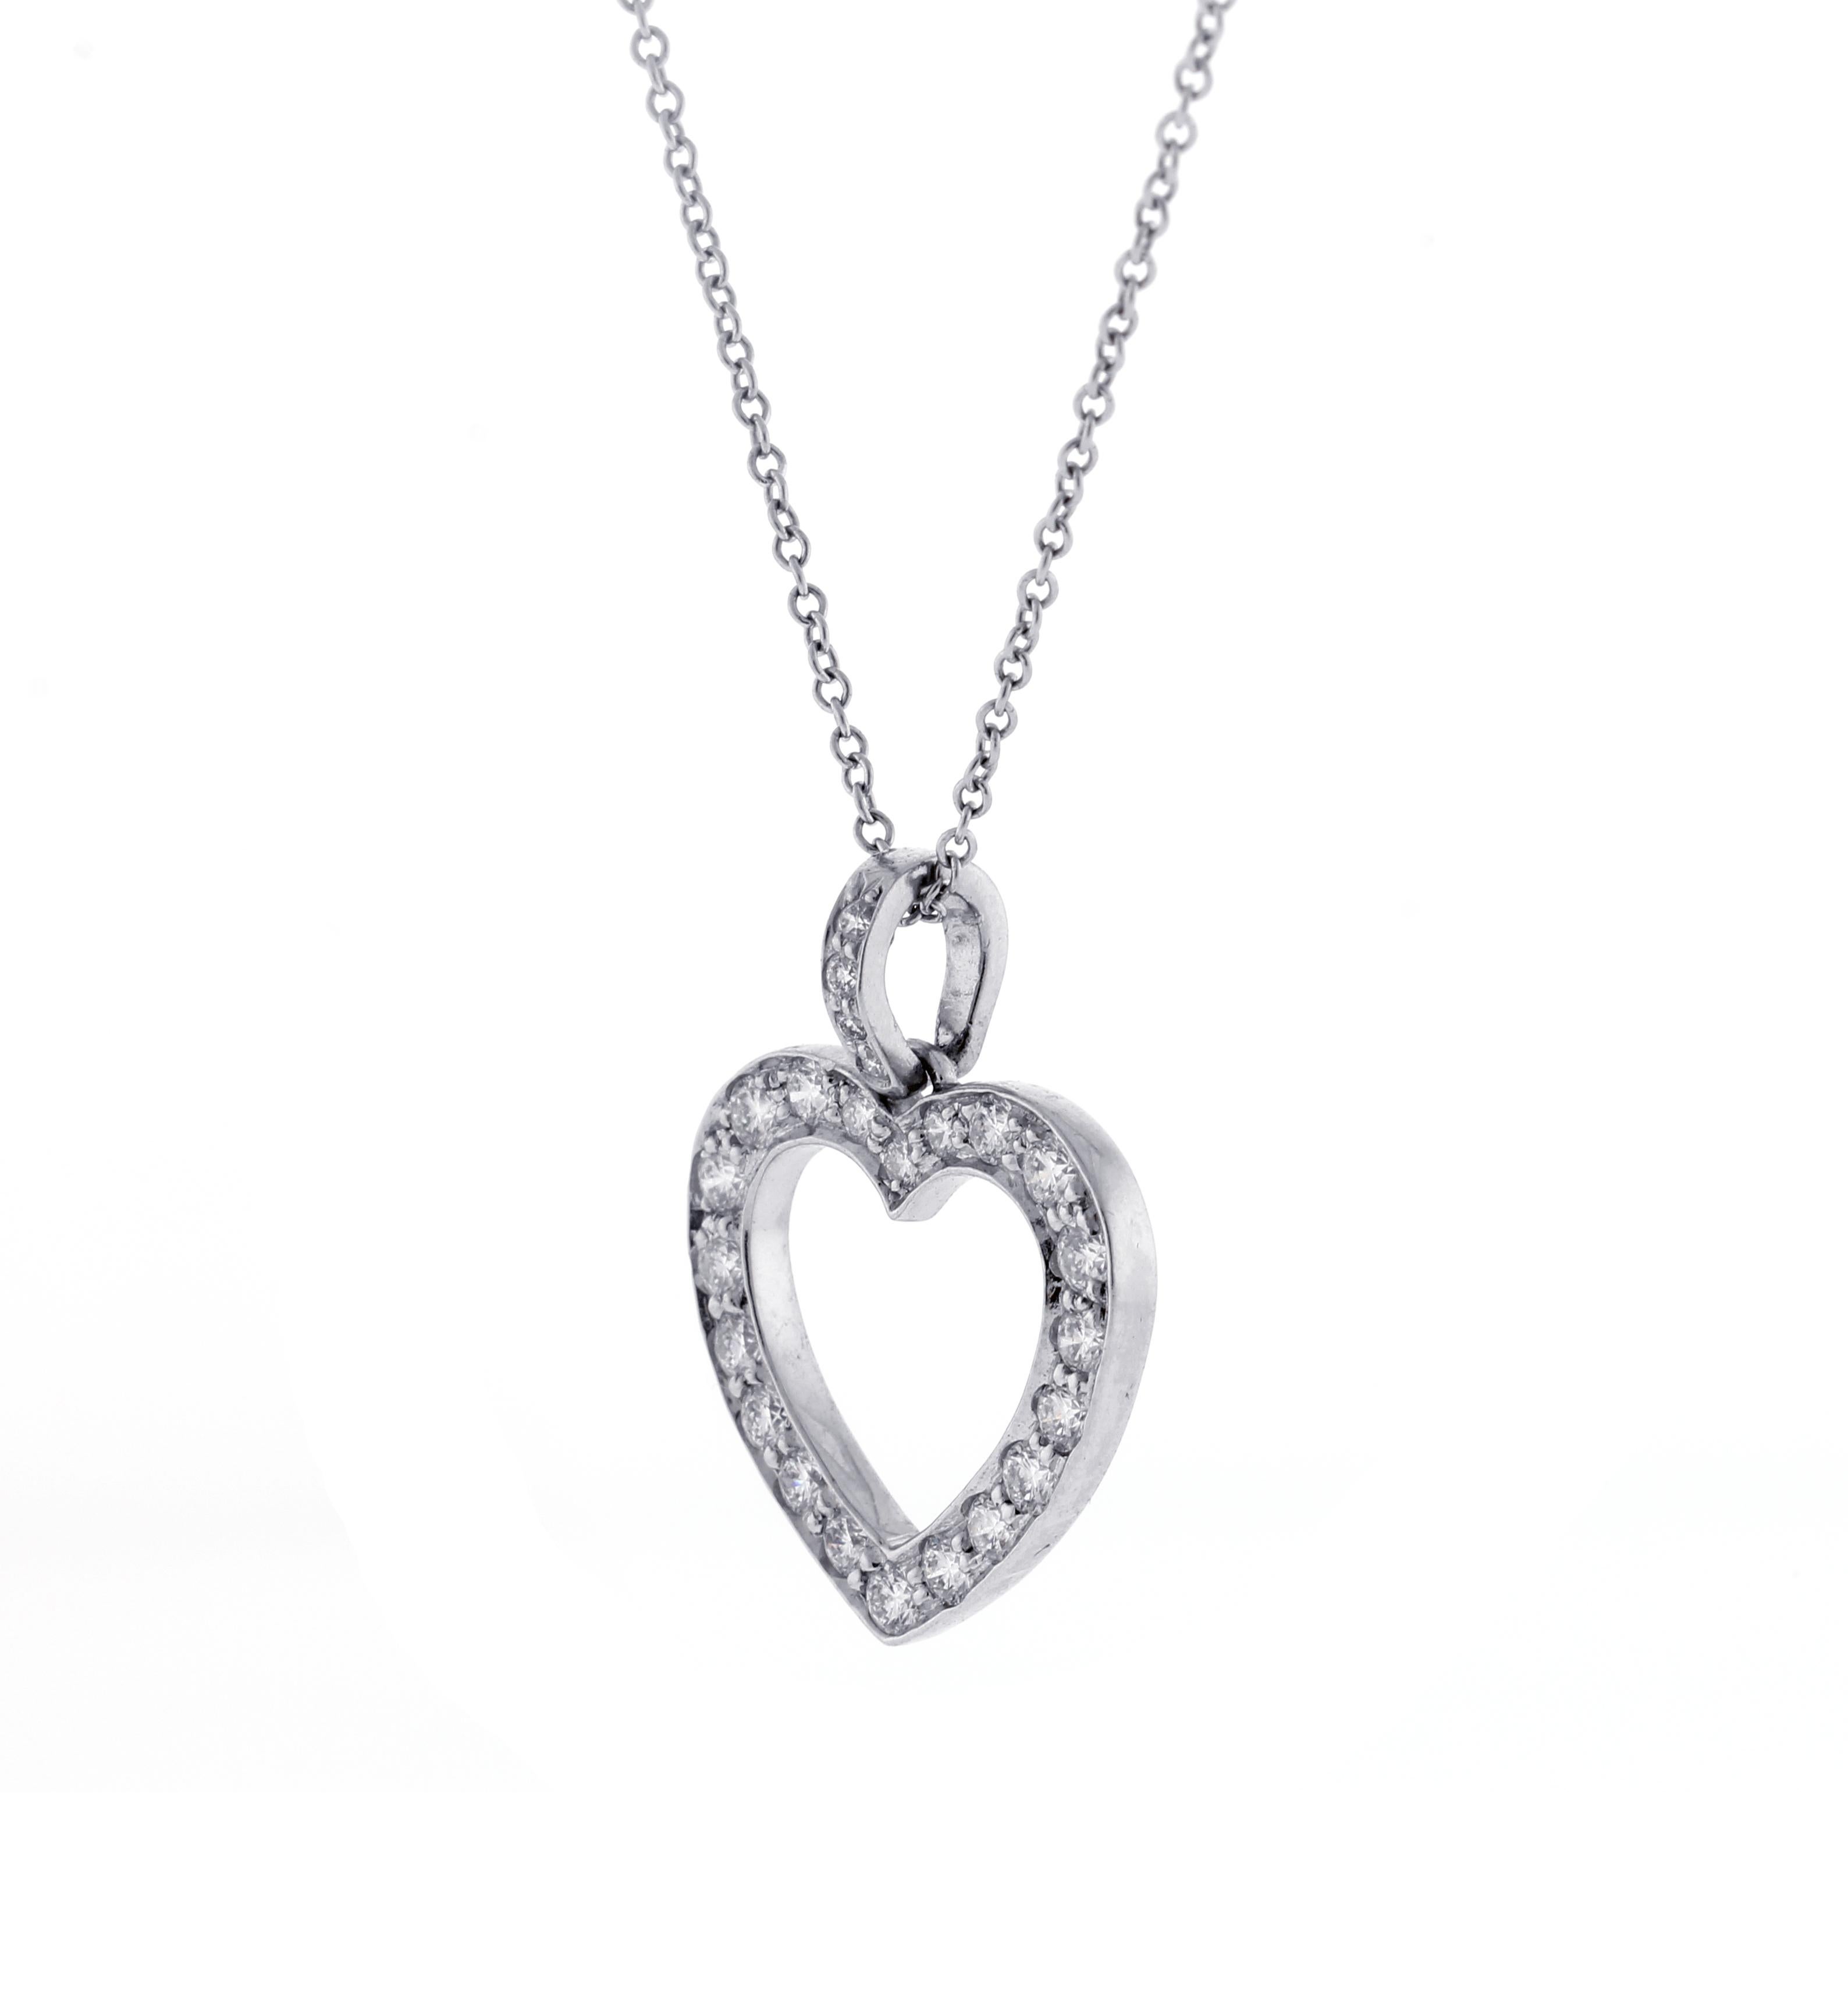 From Tiffany & Co. an open heart diamond pendant on a 16 inch necklace
♦ Designer: Tiffany & Co.
♦ Metal: Platinum
♦ Circa 1990s
♦ 11/16th of an inch wide 
♦ 24 Diamond=.55 carat, F-G VVS
♦ Tiffany Pouch
♦ Condition: Excellent , pre-owned
♦ Price: